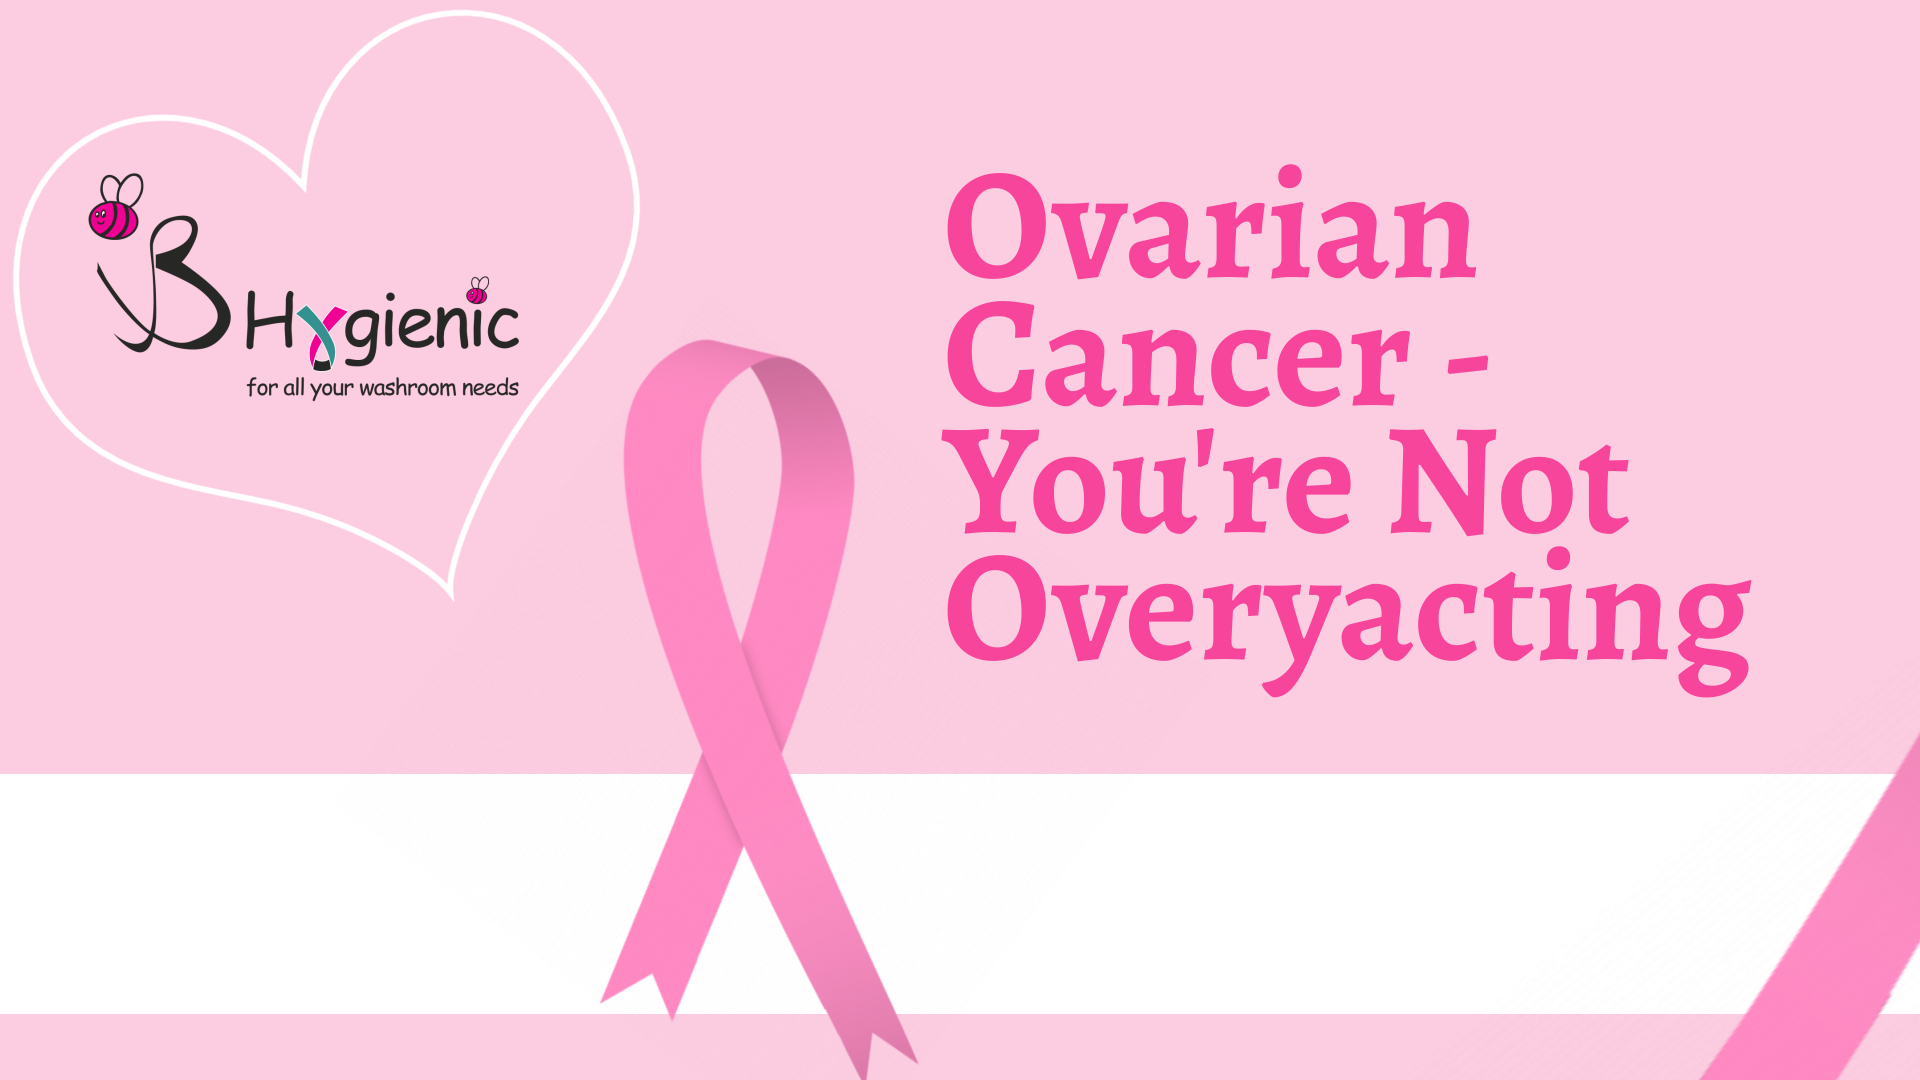 Ovarian Cancer   You're Not Overyacting